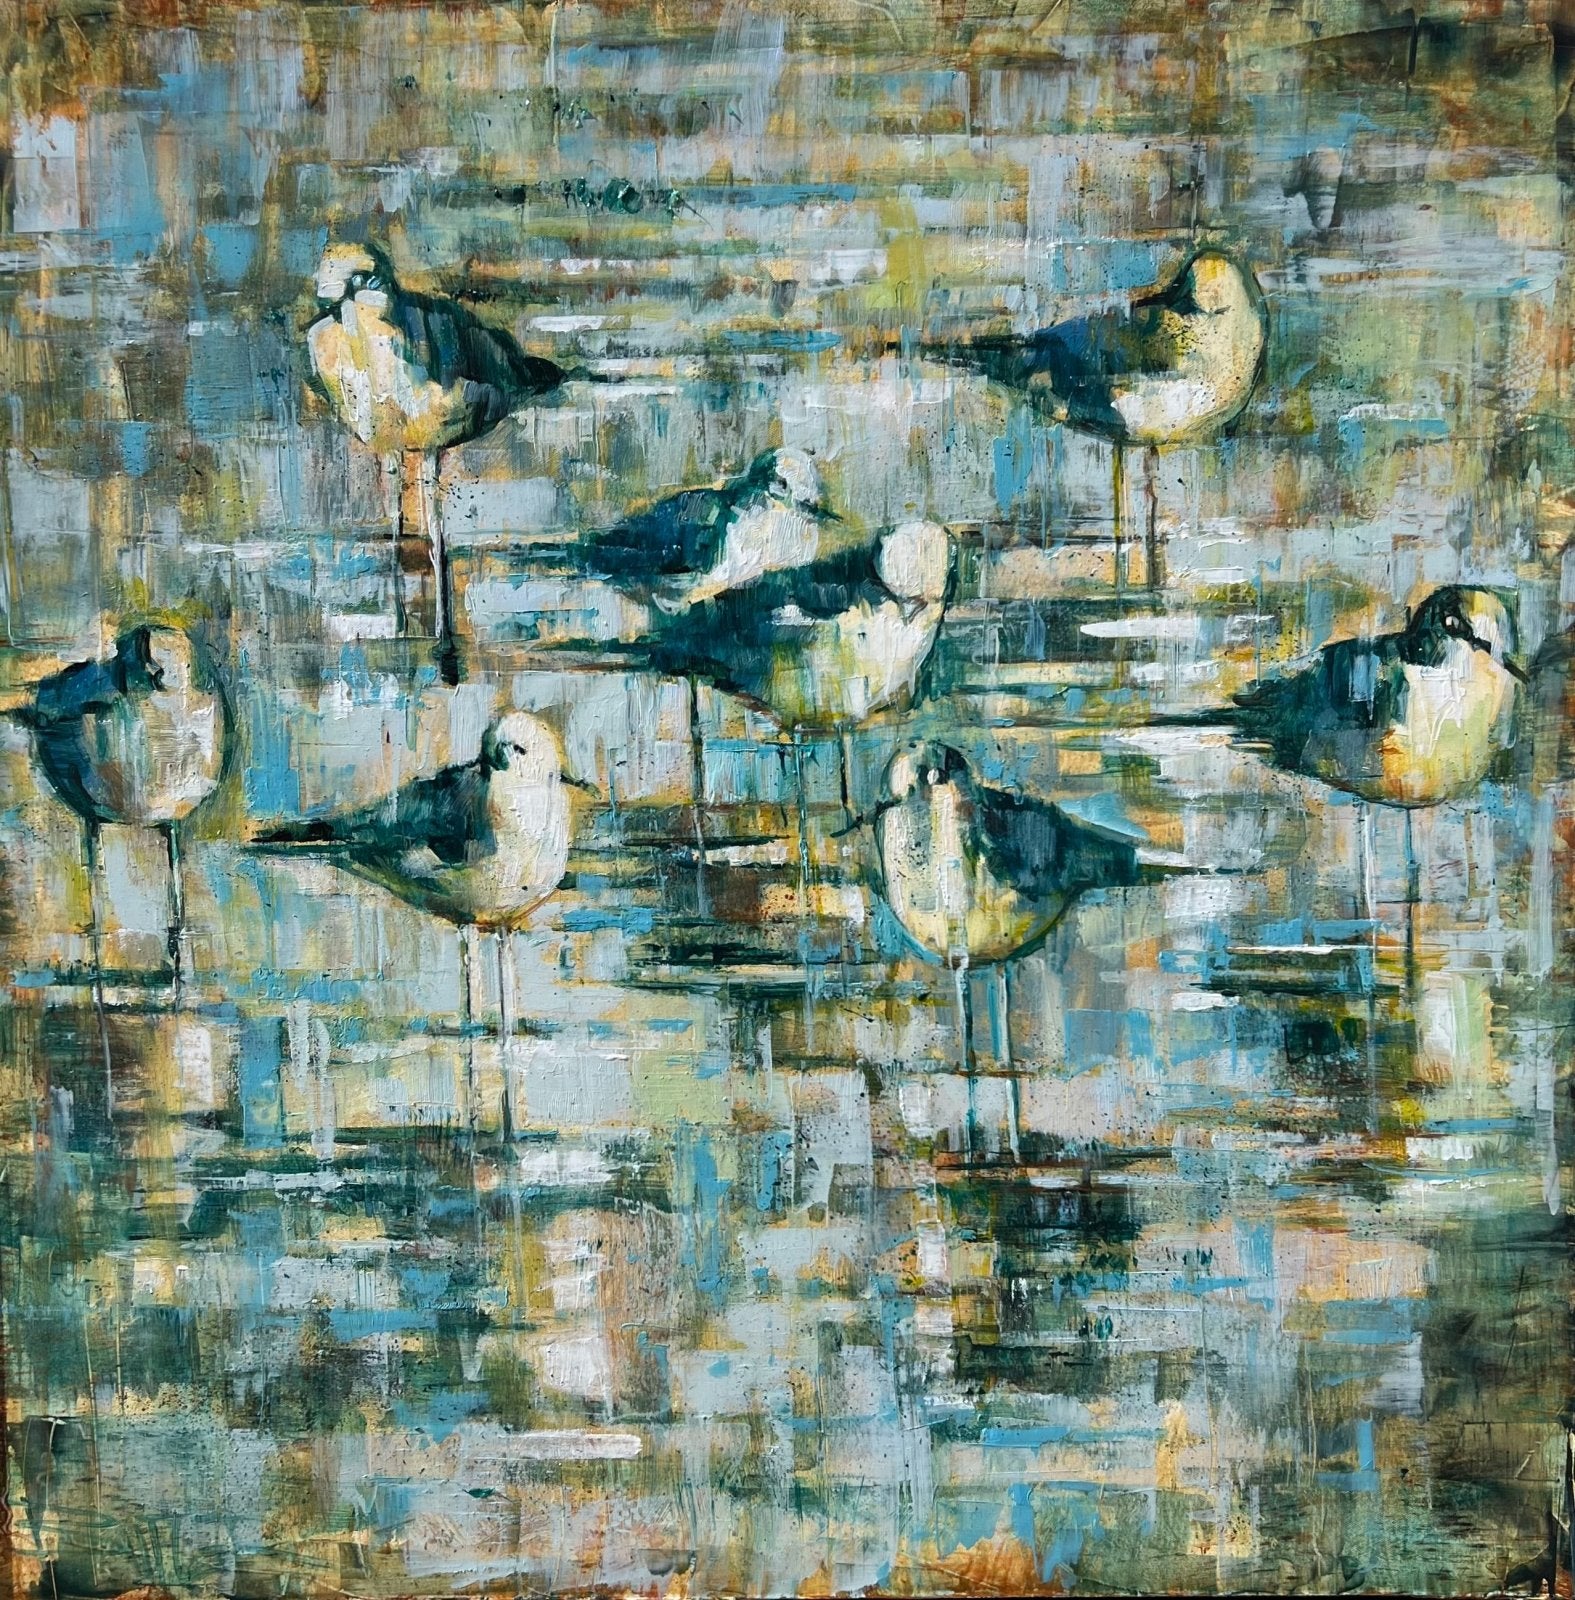 Shorebird Symphony by Curt Butler at LePrince Galleries